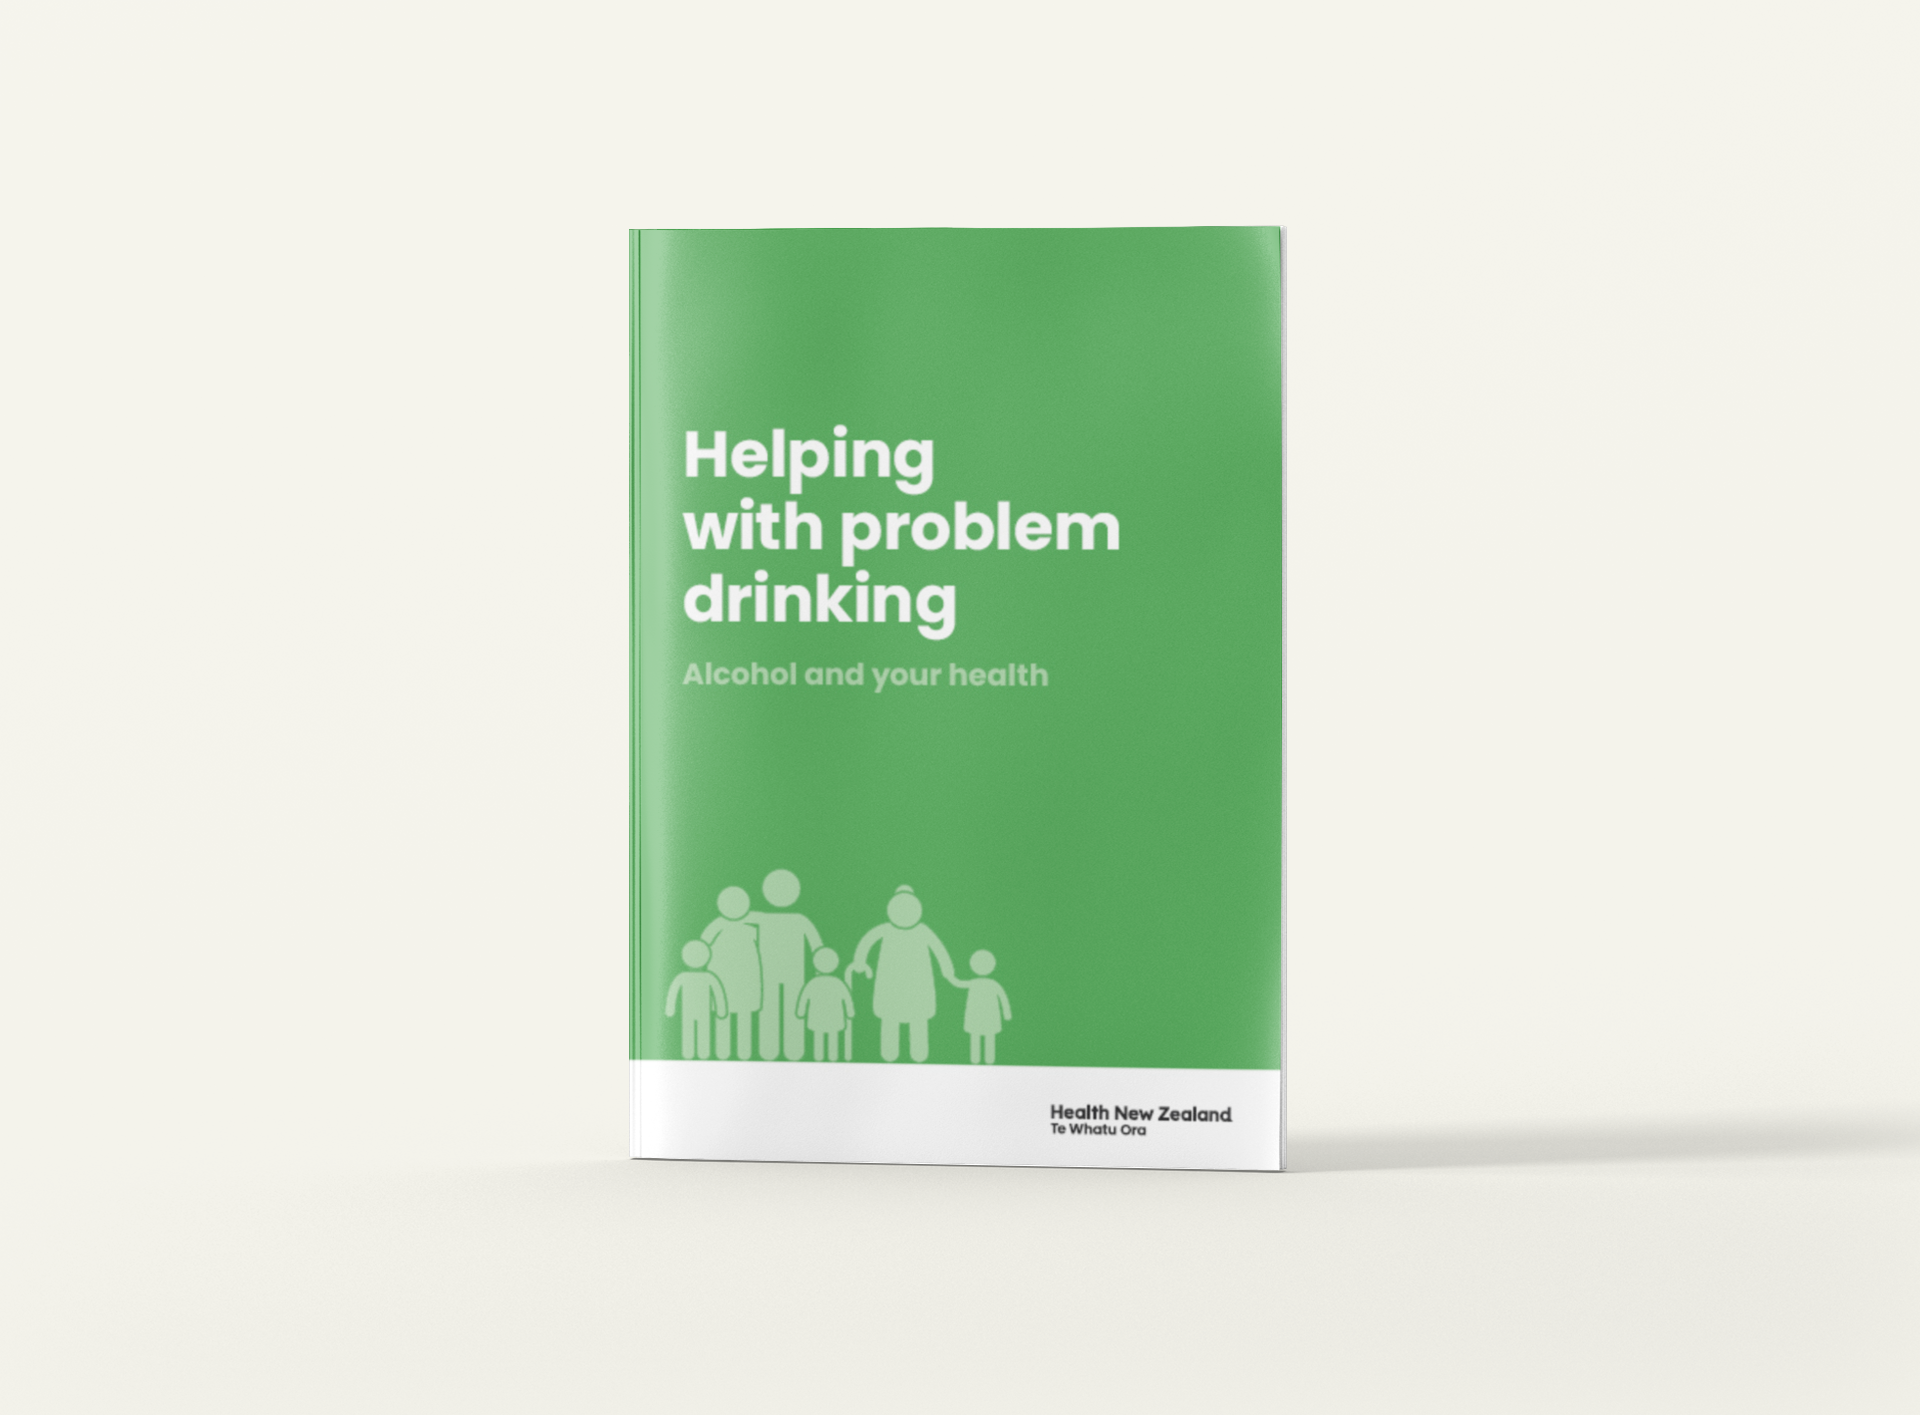 Helping with Problem Drinking booklet